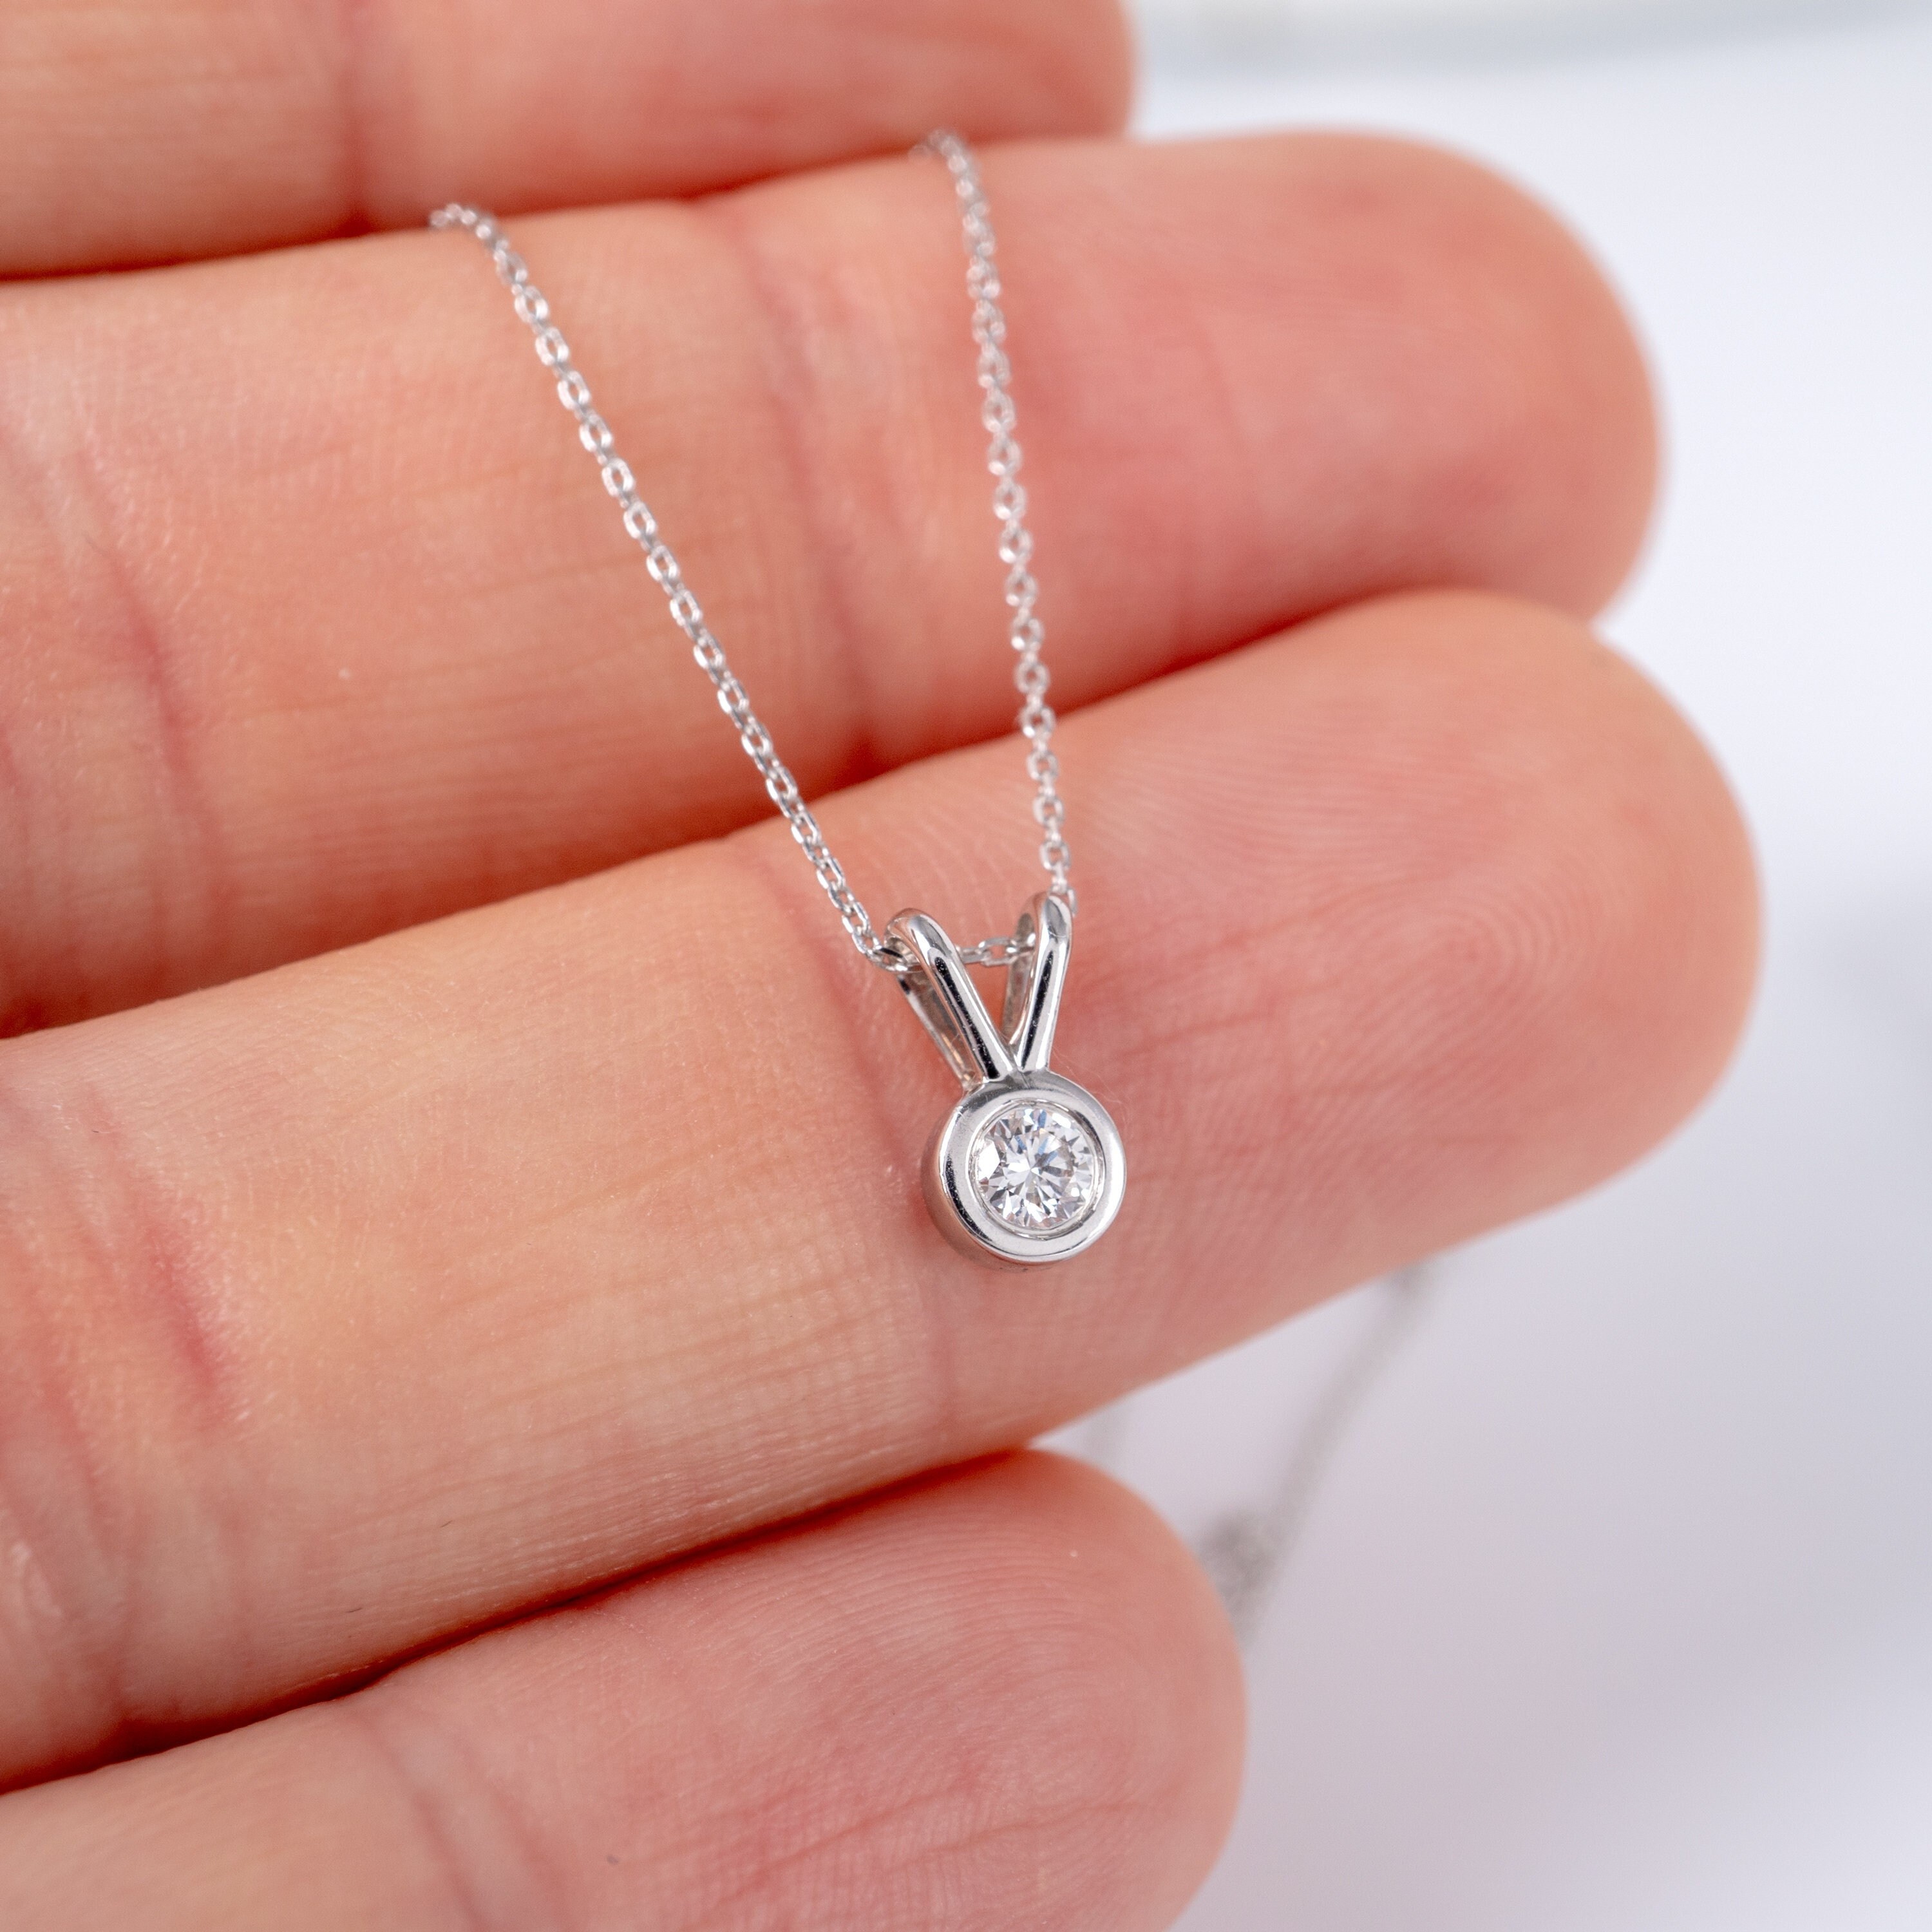 Diamond V Pendant Necklace in 14k Yellow Gold – Bailey's Fine Jewelry